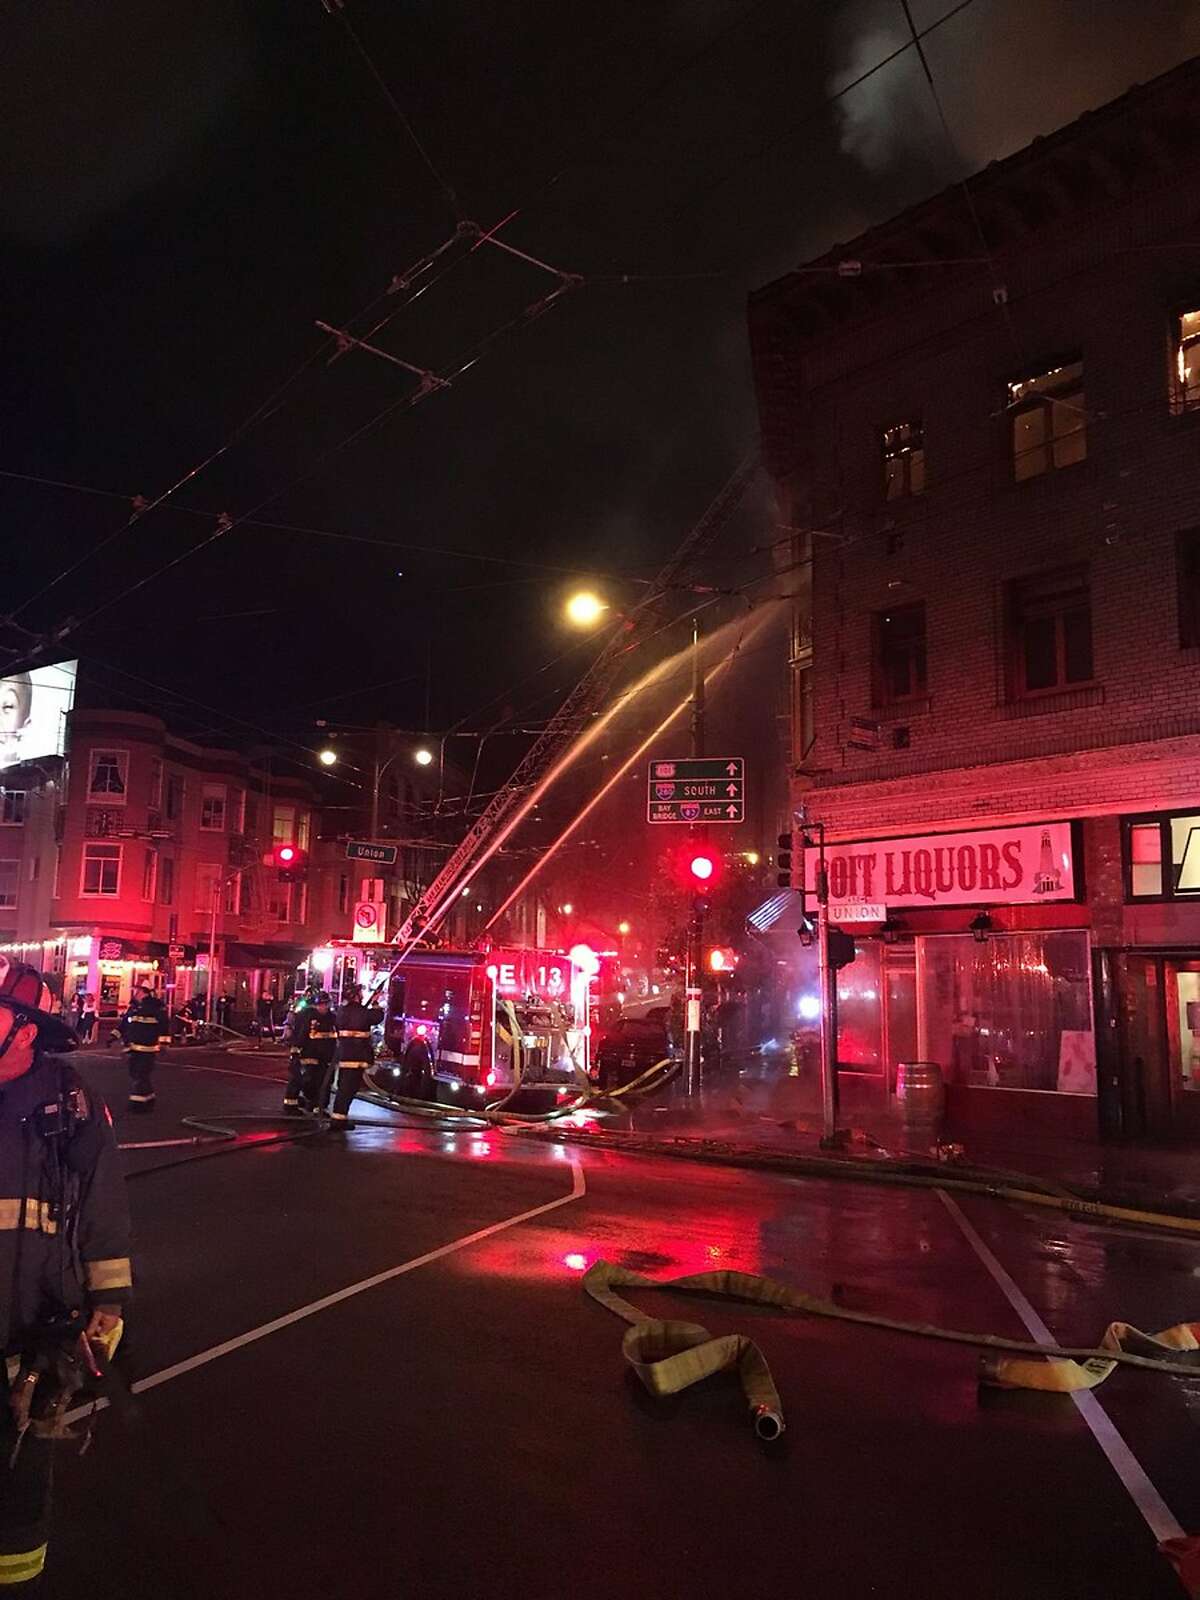 In this Saturday, March 17, 2018, photo released by the San Francisco Fire, firefighters contain a blaze on a building in the heart of San Francisco's North Beach district in San Francisco. San Francisco Fire authorities are investigating the cause of the massive building blaze that broke out during the thick of St. Patrick's Day celebrations. (San Francisco Fire via AP